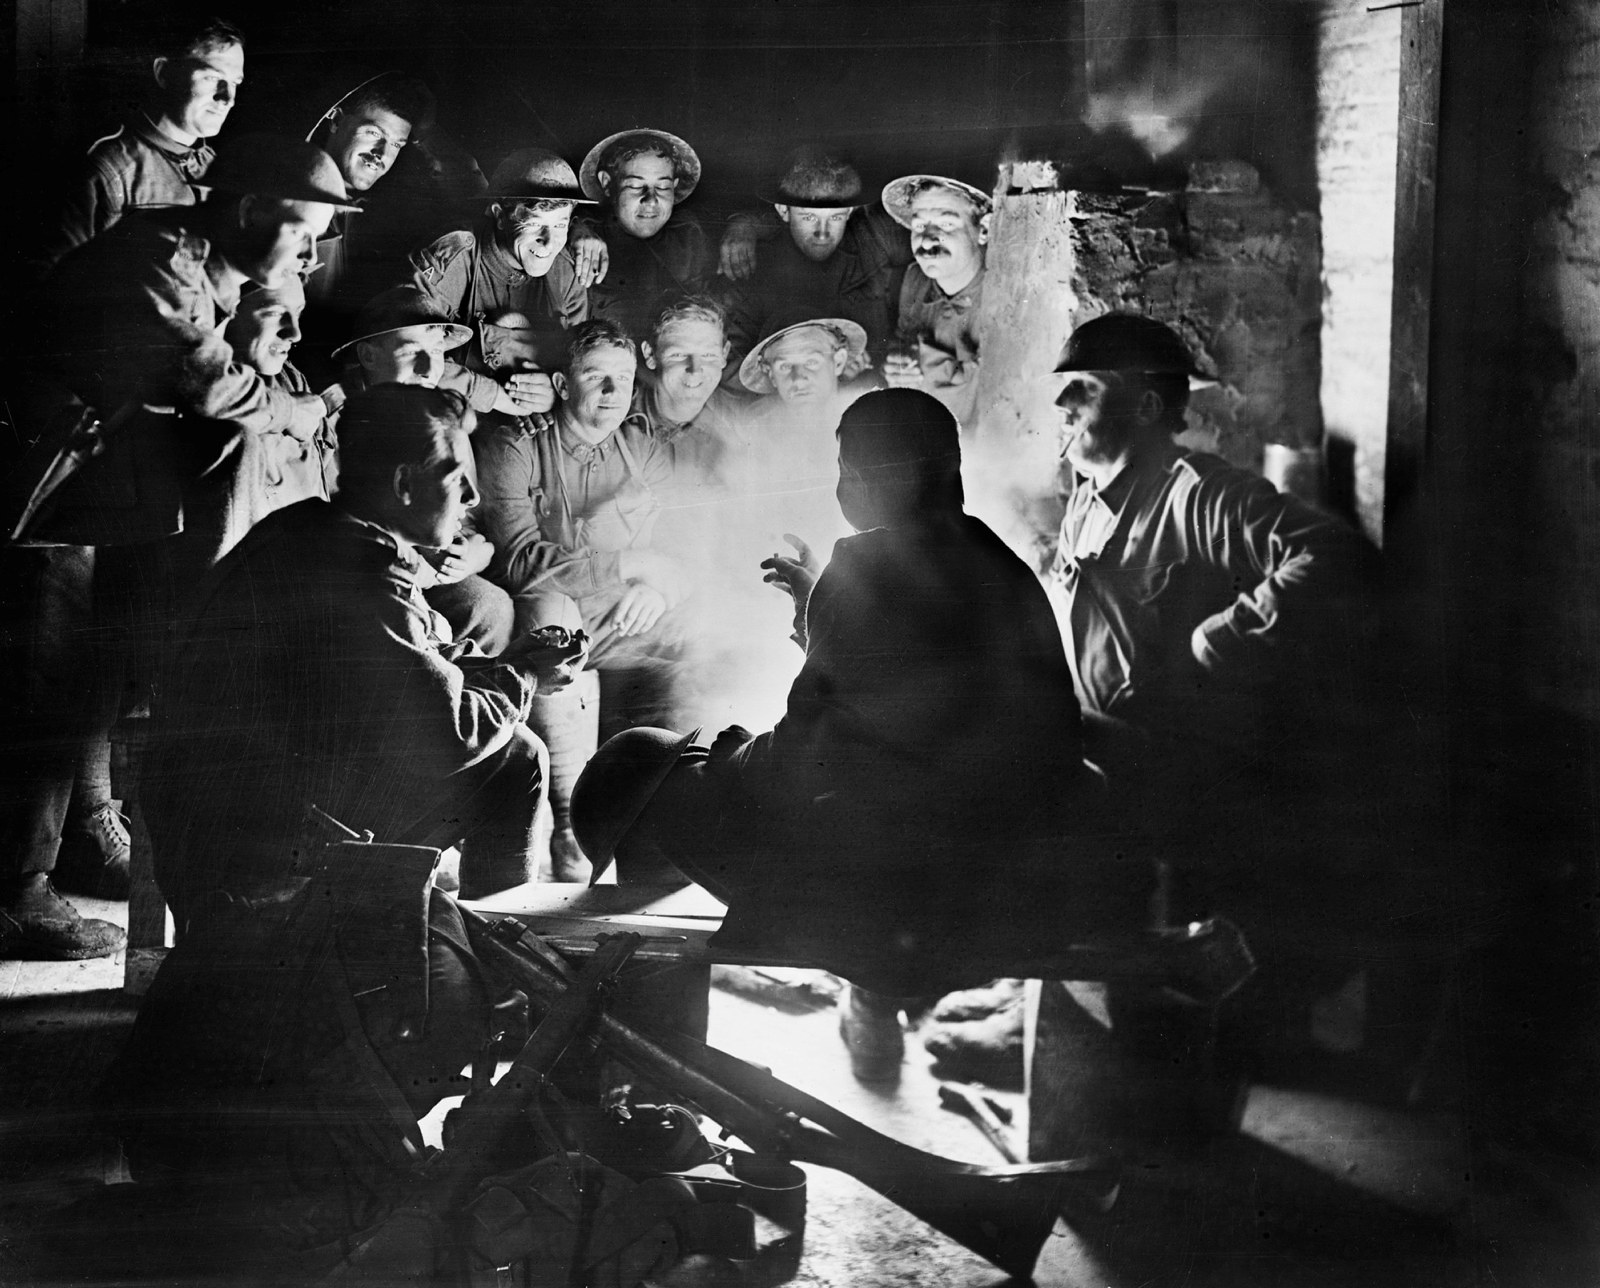 Members of the 1st Australian Light Trench Mortar Battery, 1st Australian Division, listening to ‘the latest’ from one of their comrades around a fire in a dugout billet at Ypres, 1917